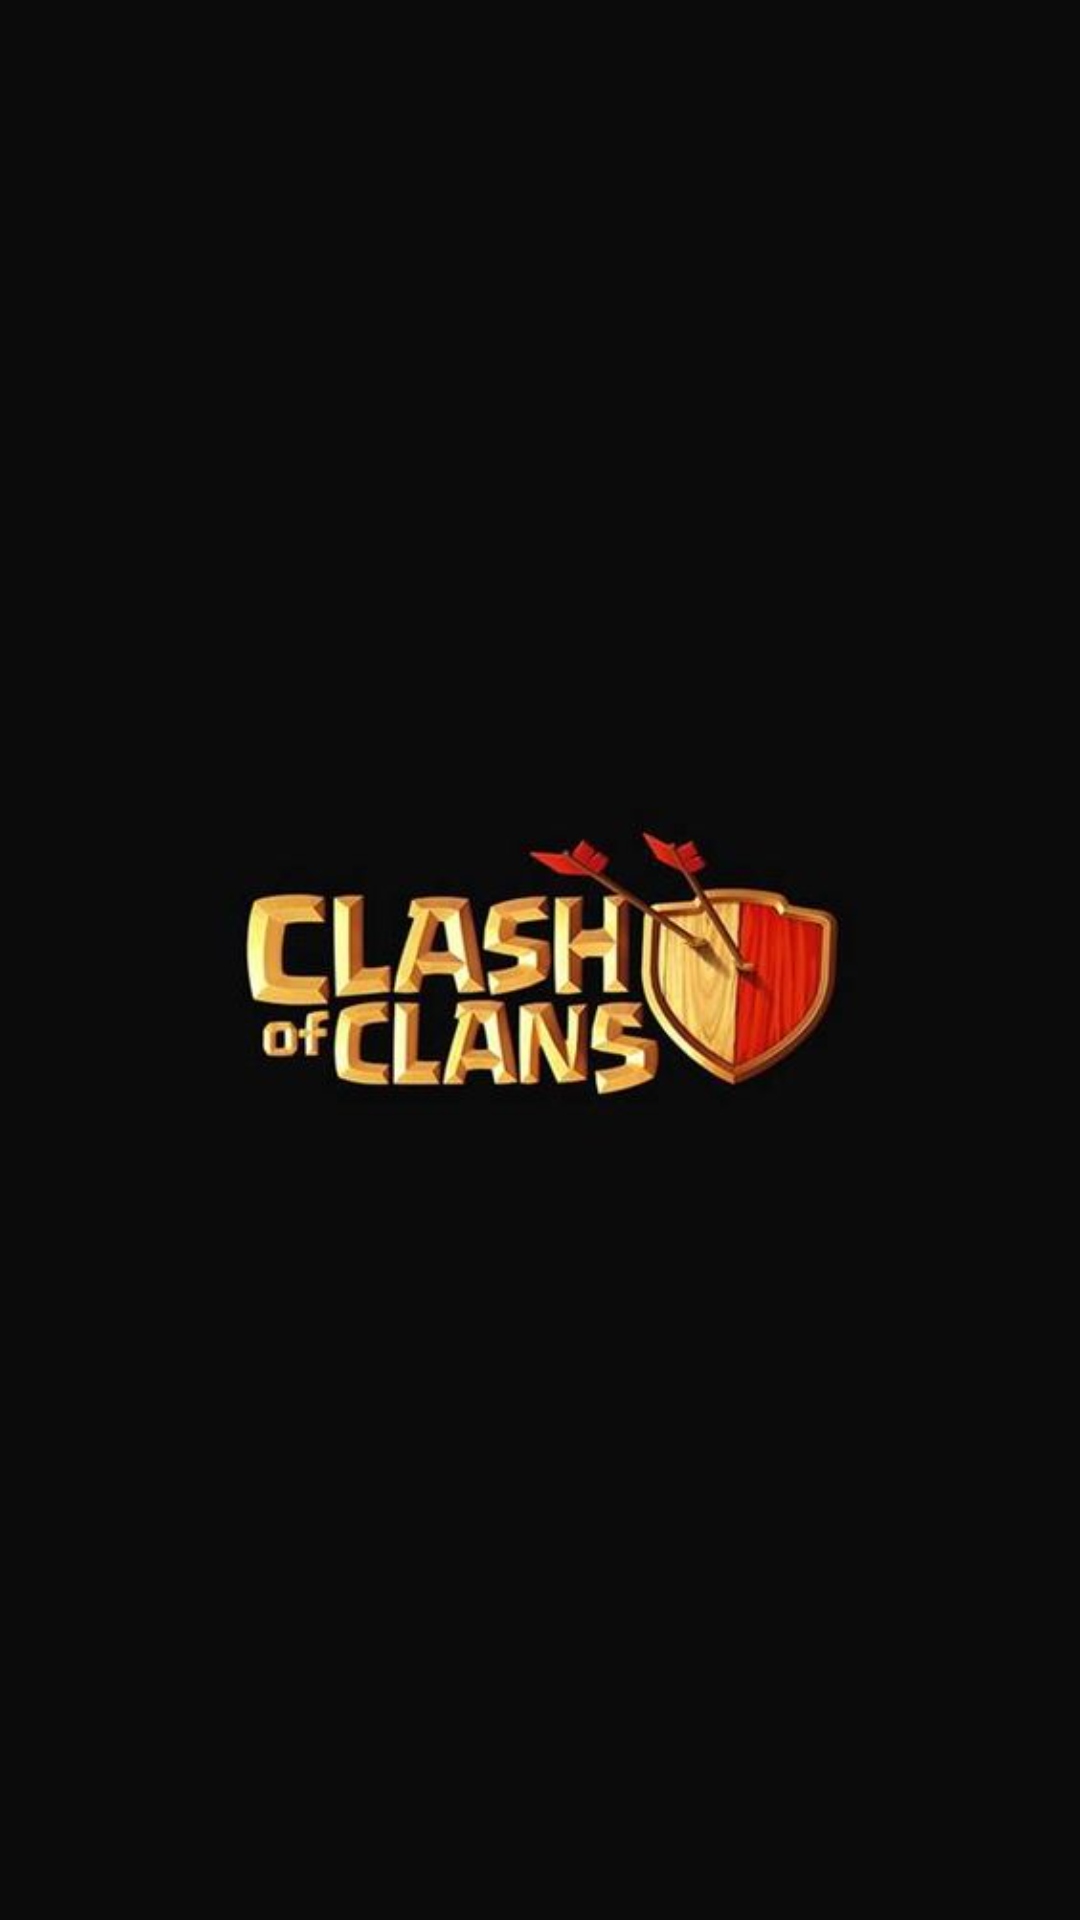 Clash of Clans Wallpaper Pictures